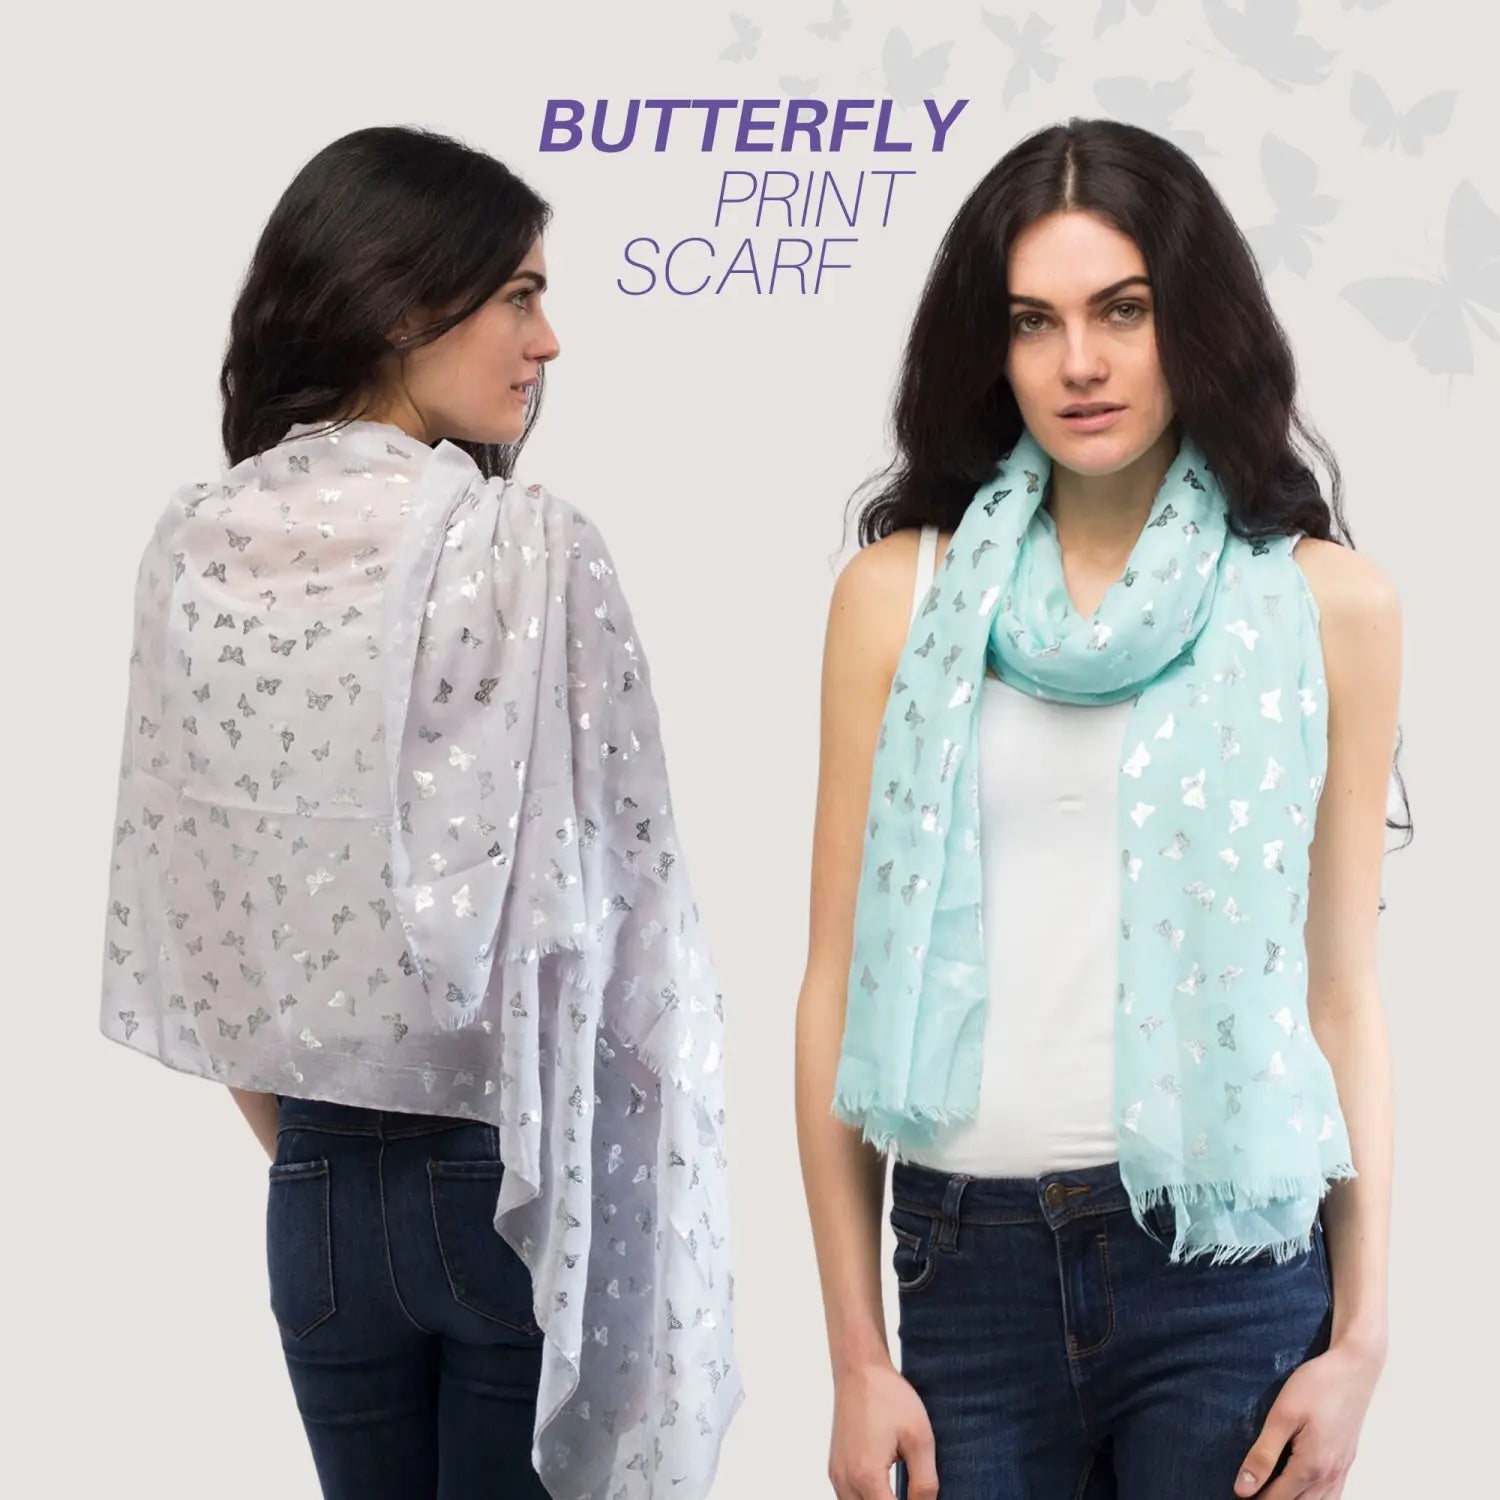 Butterfly print oversized scarf with silver foil pattern on display